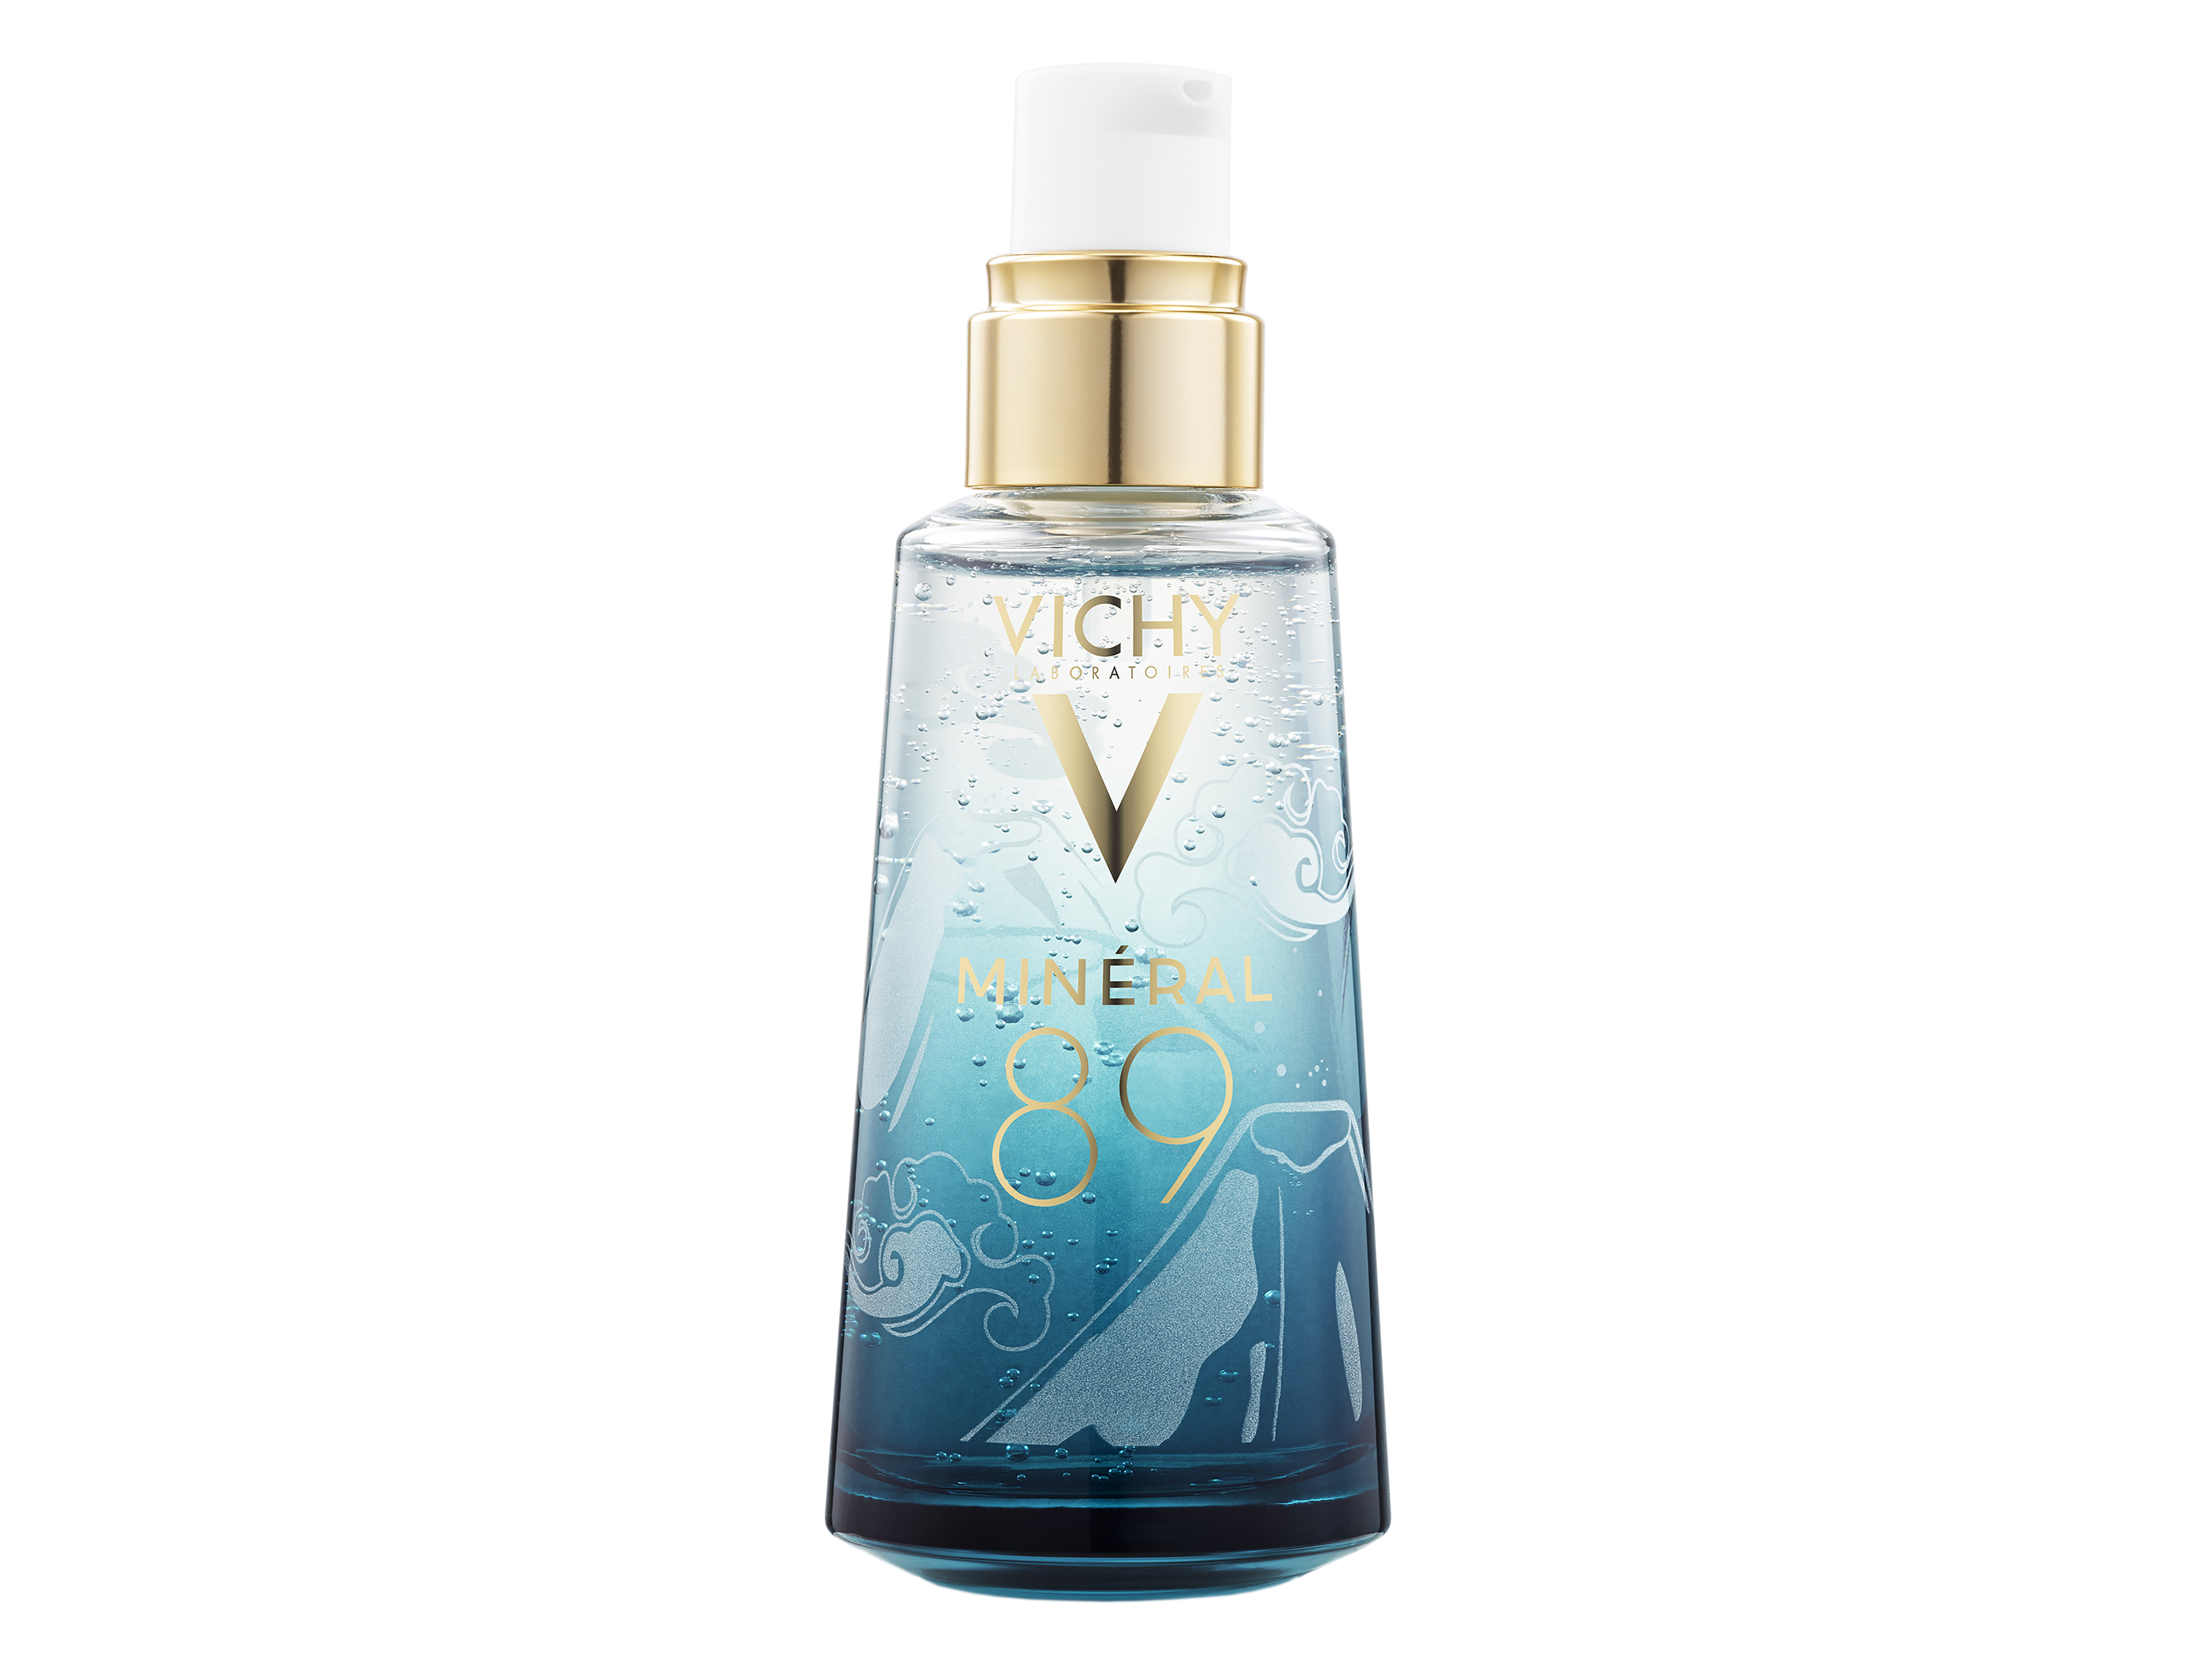 Vichy Mineral 89 Booster Limited Edition, 50 ml